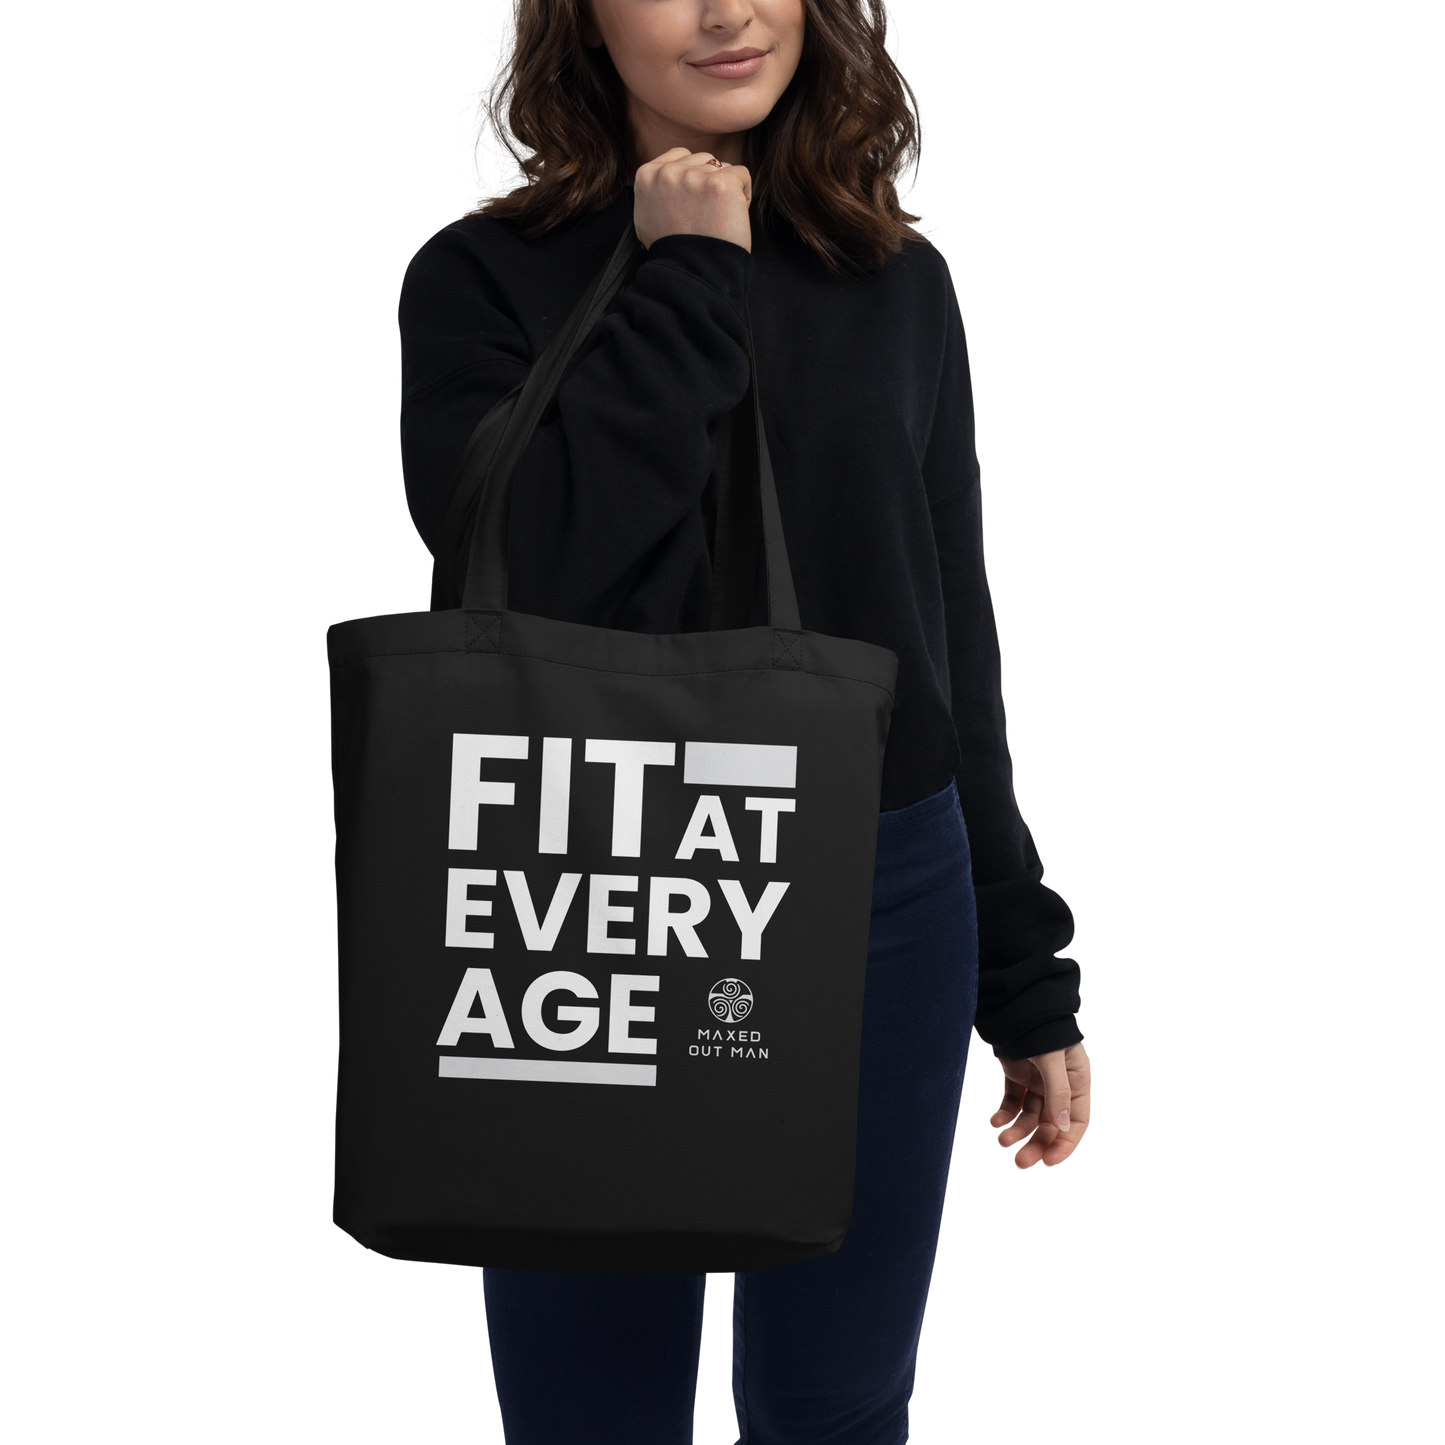 Fit at Every Age Tote Bag